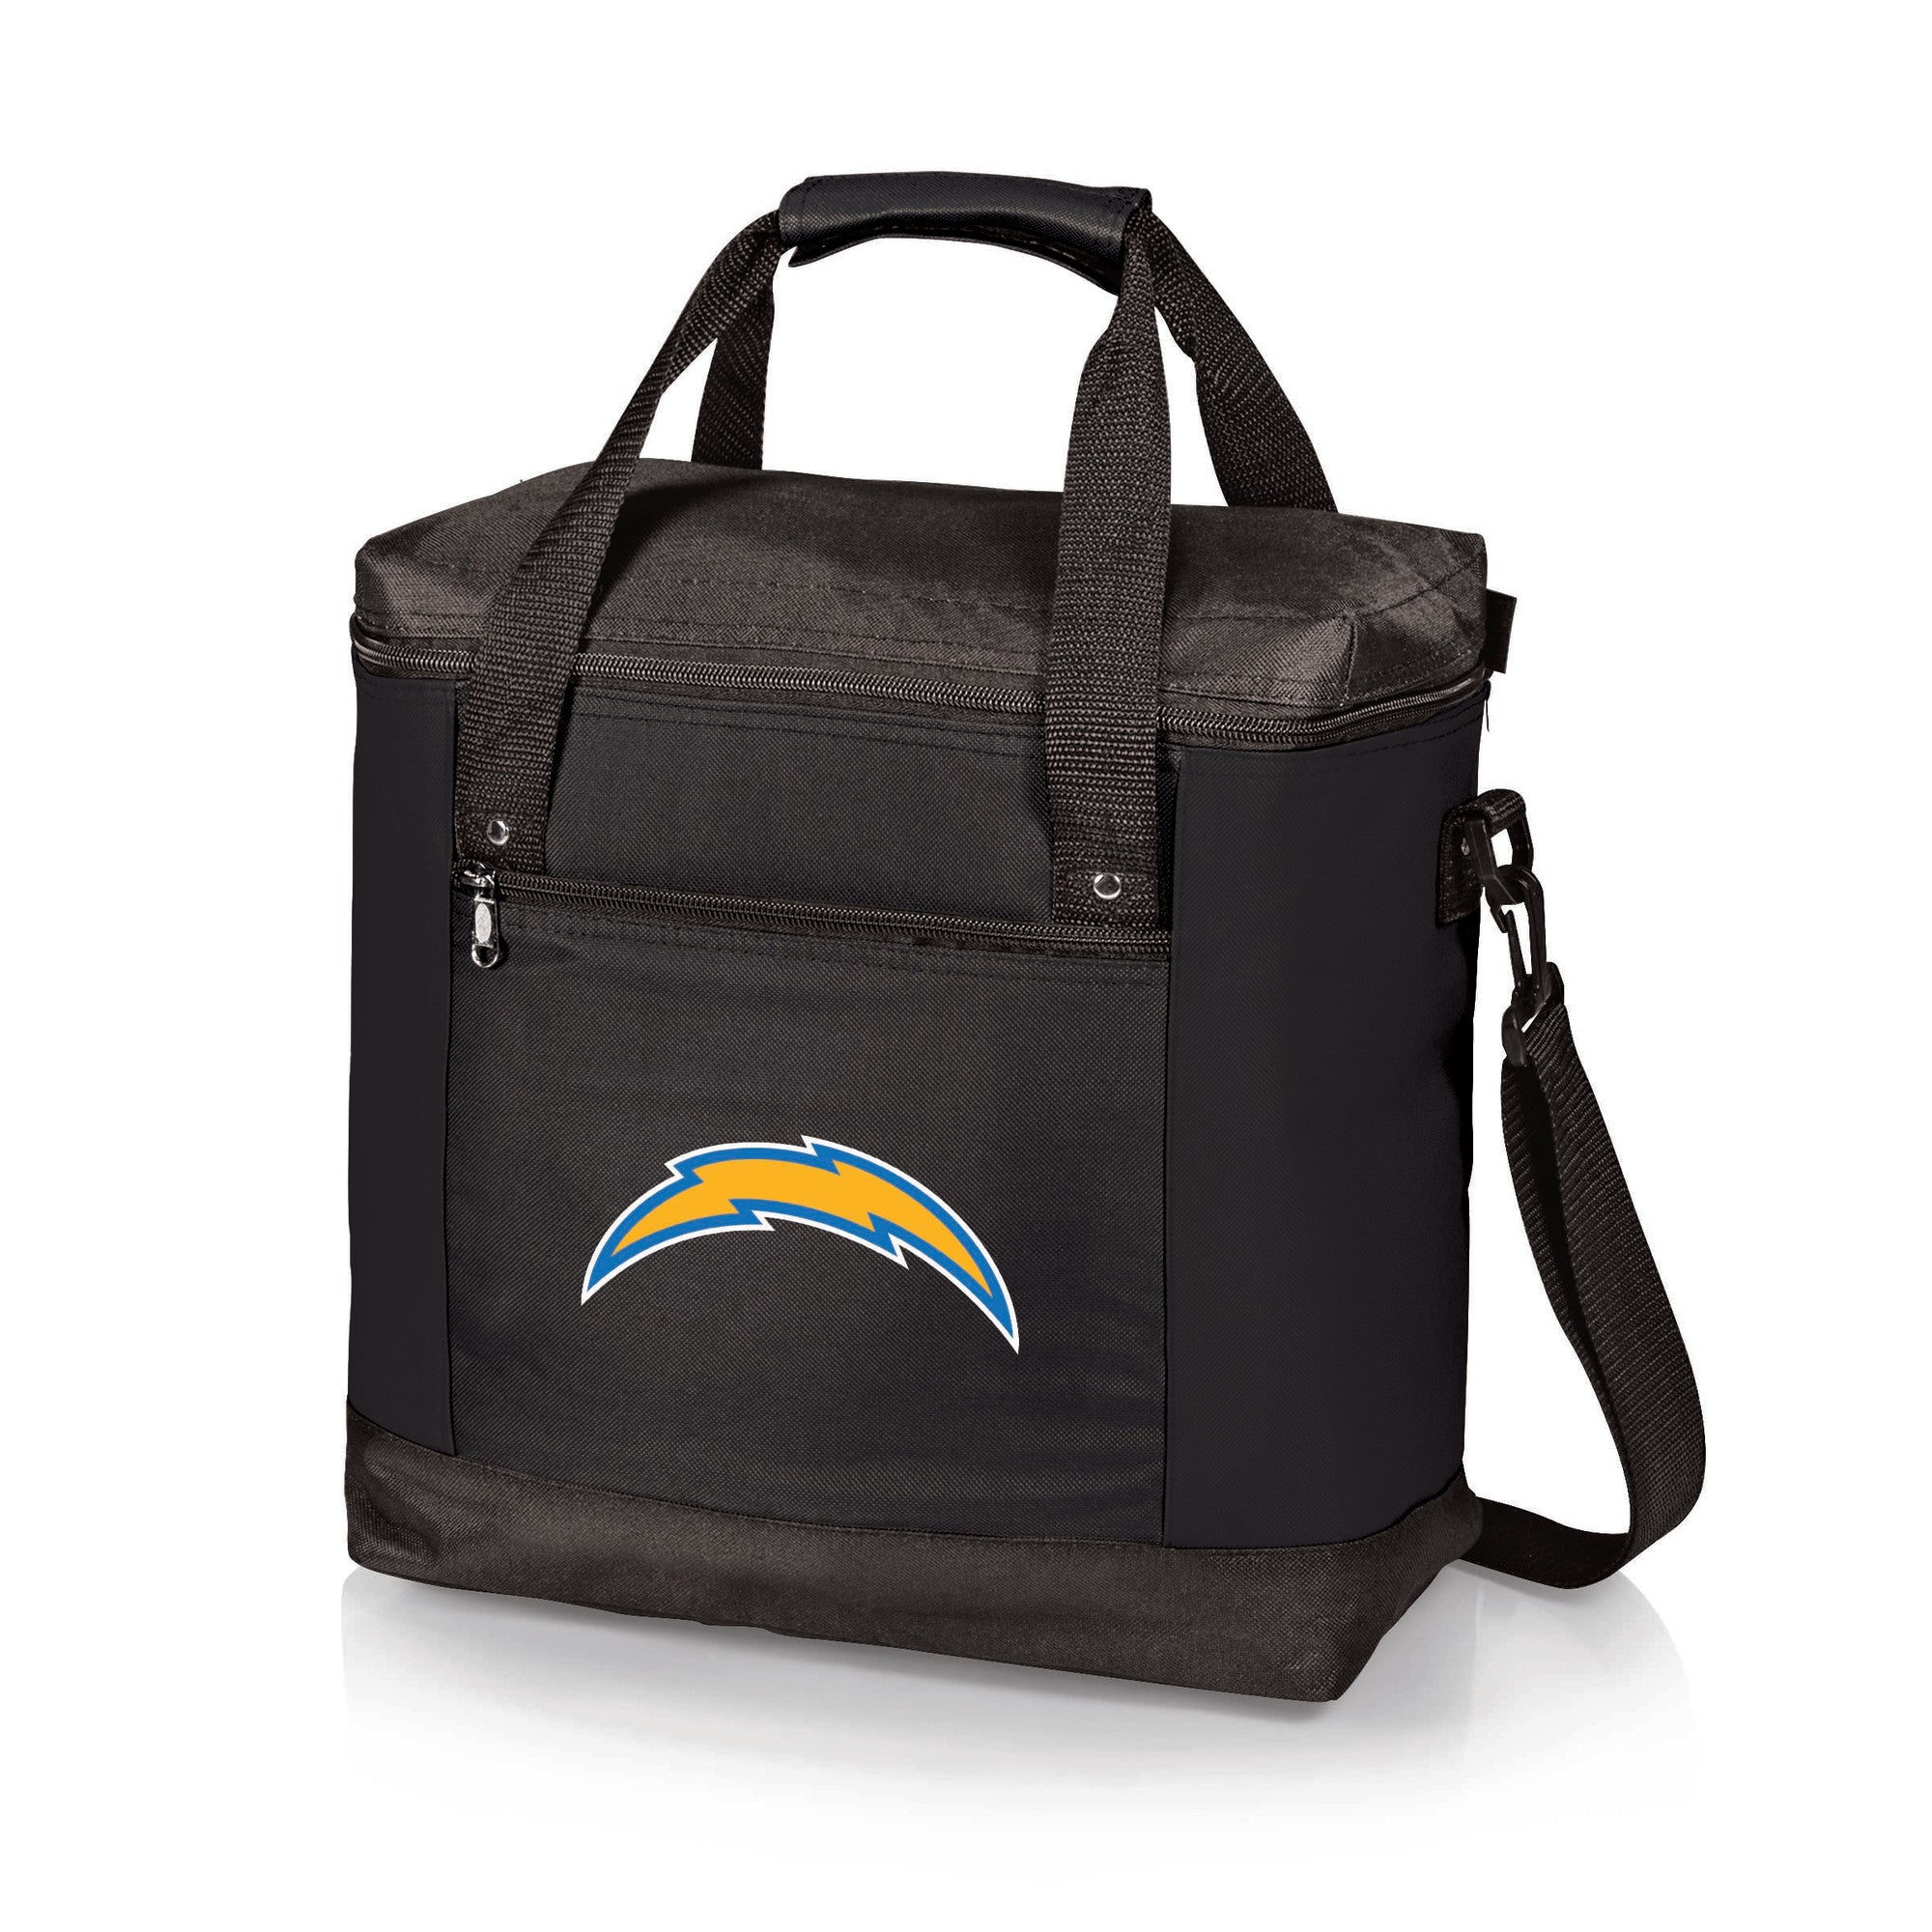 Los Angeles Chargers - Montero Cooler Tote Bag